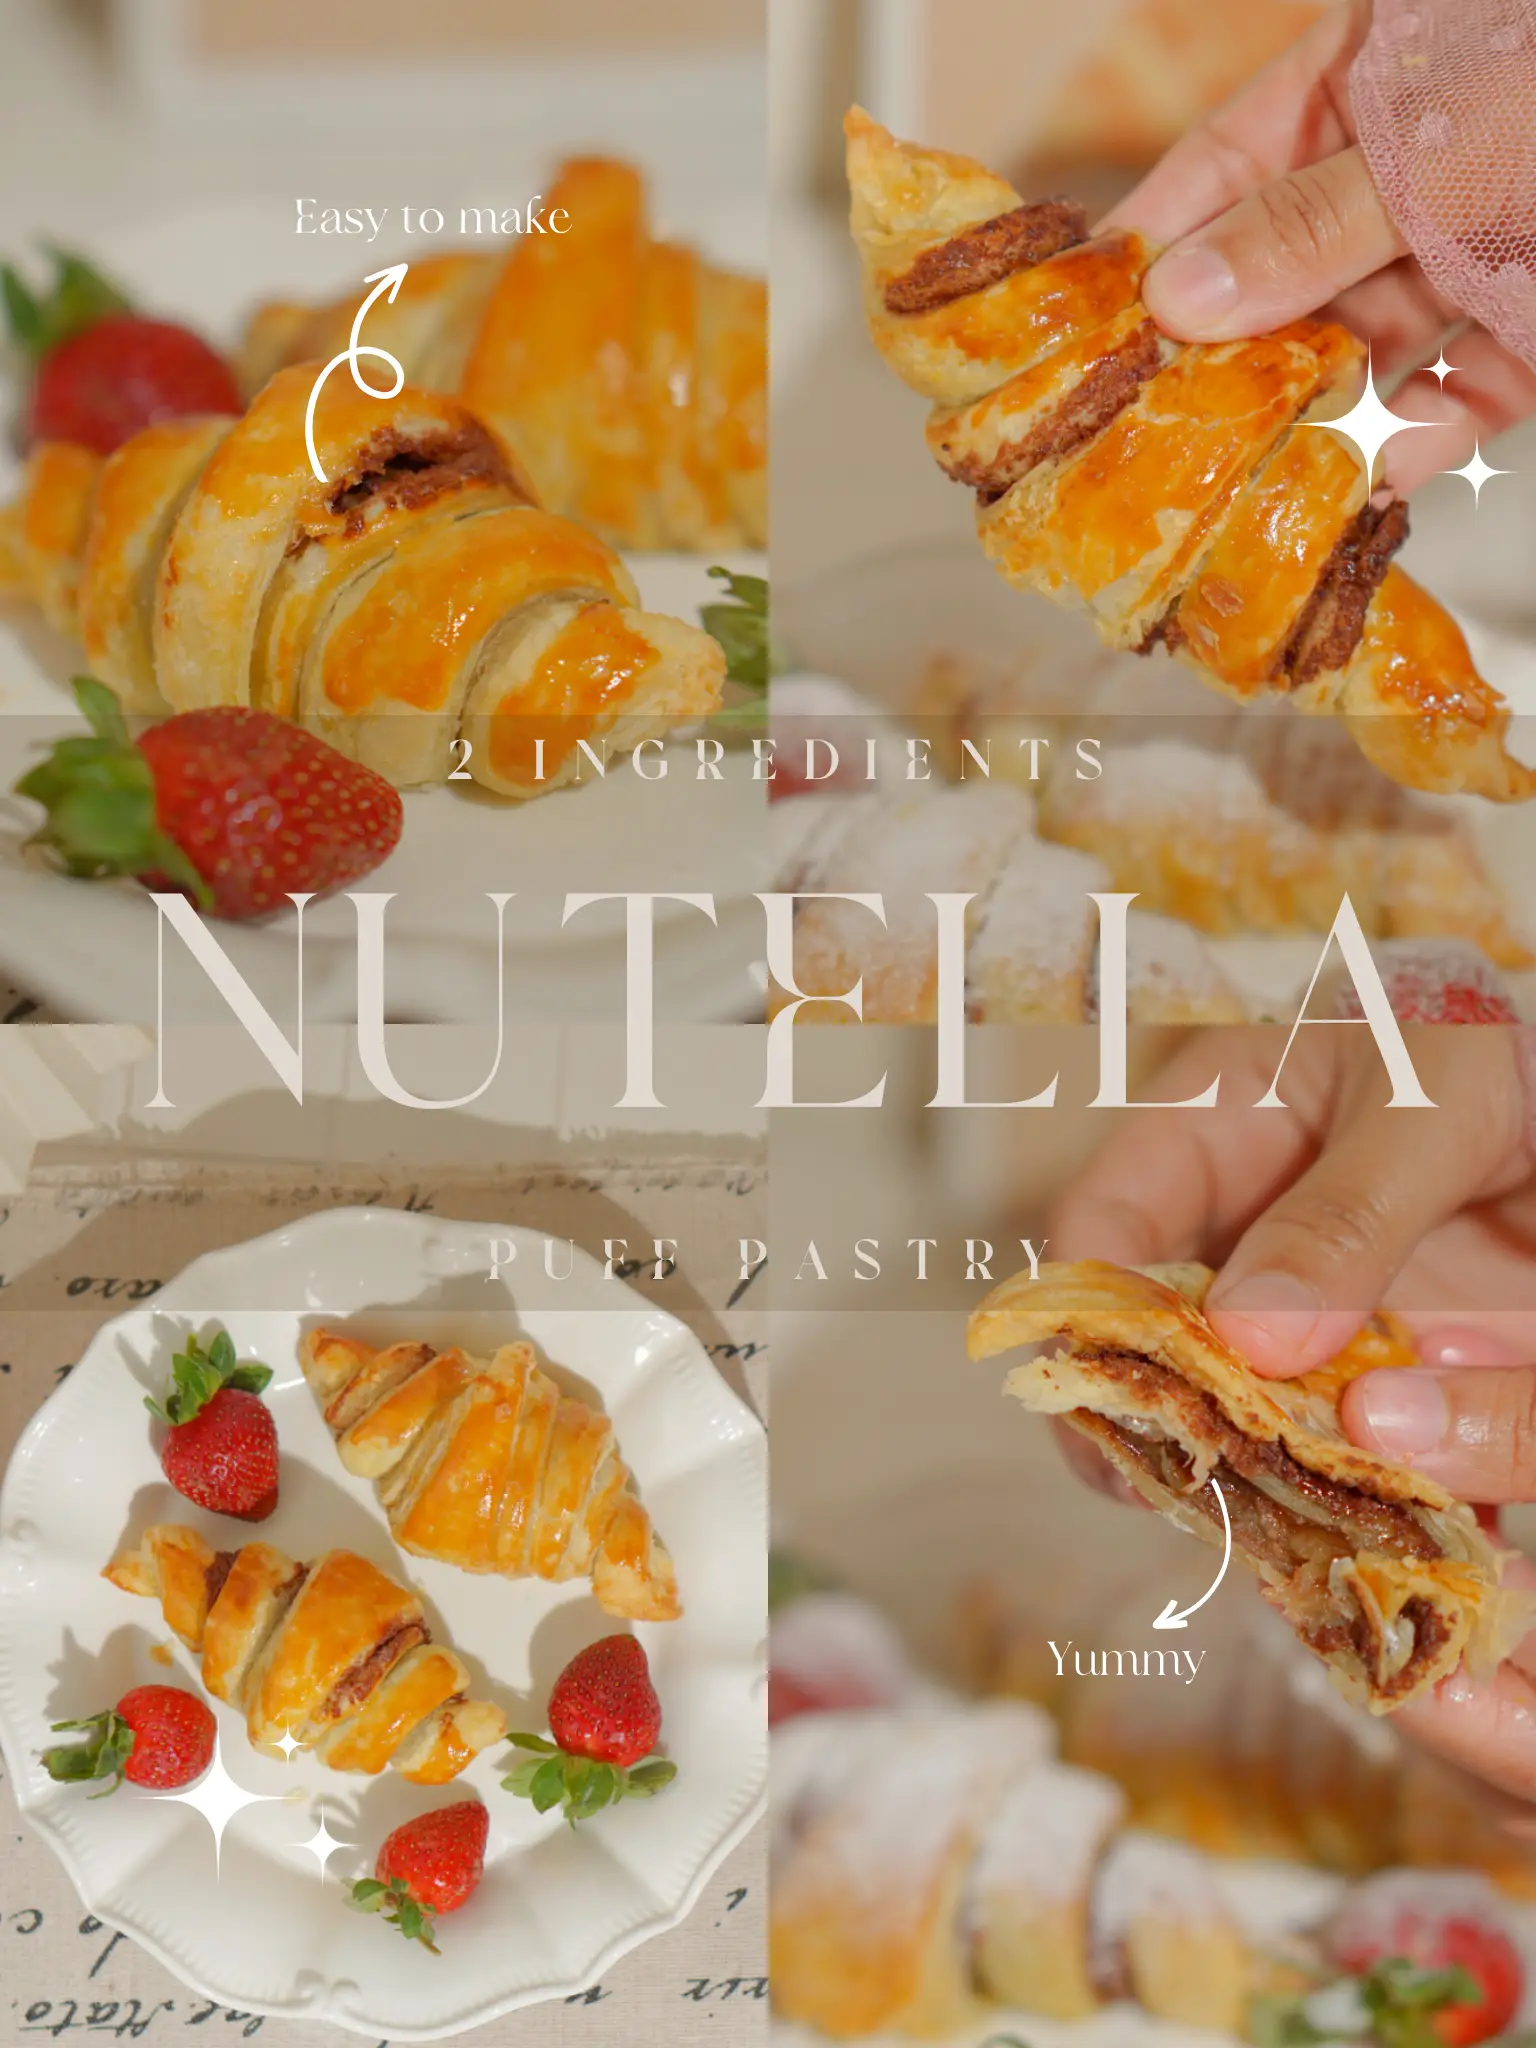 Mini croissants with Nutella in 30 minutes. Video recipe